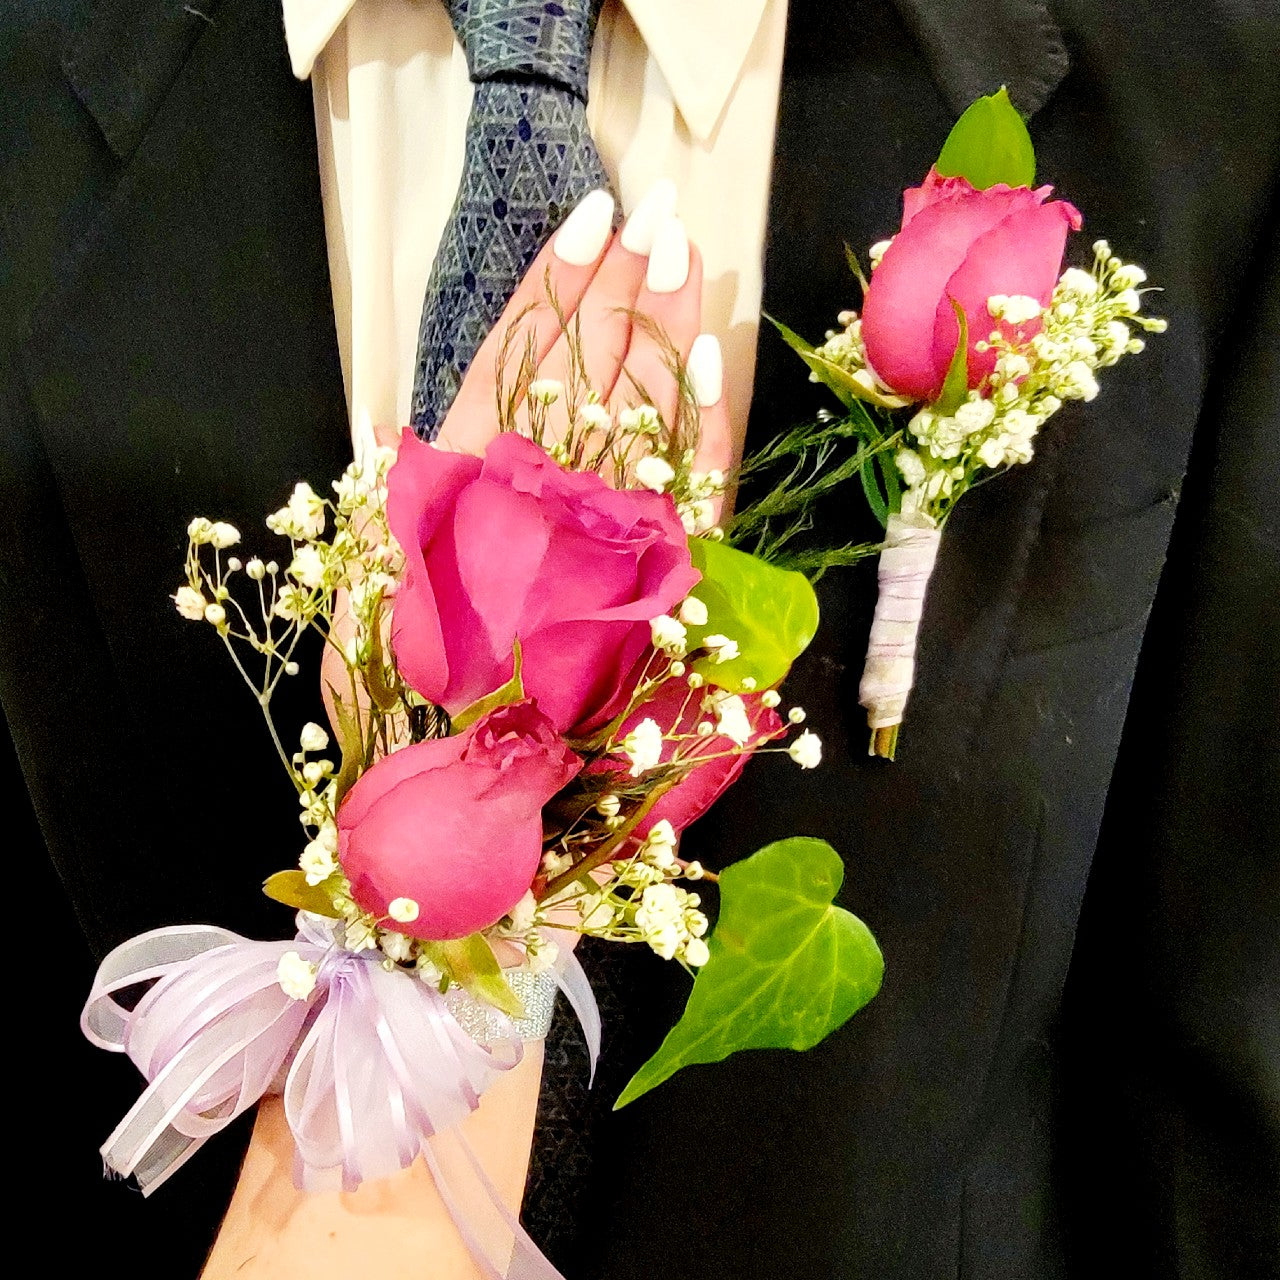 Carnation Corsages And Boutonniere Combo, 52% OFF